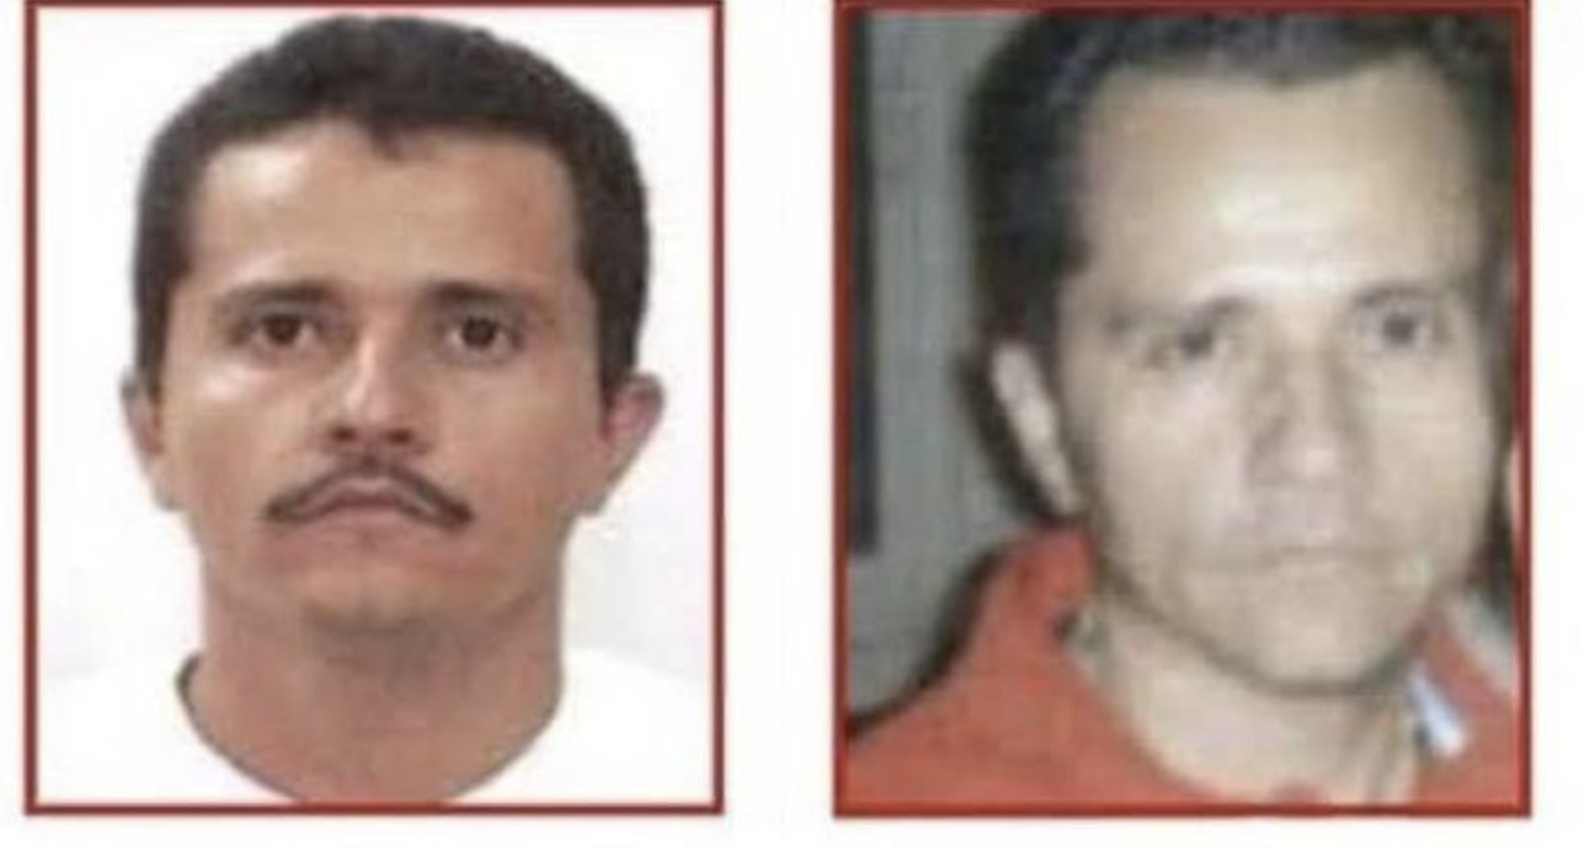 El Chapo and Nemesio Oseguera Cervantes (leader of CJNG), they are horrid people who have fueled violence, opioid deaths via spiking drugs with Fentanyl, traffic people, etc etc… but there are some rumors that Nemesio Oseguera Cervantes is dead which I hid hope is true